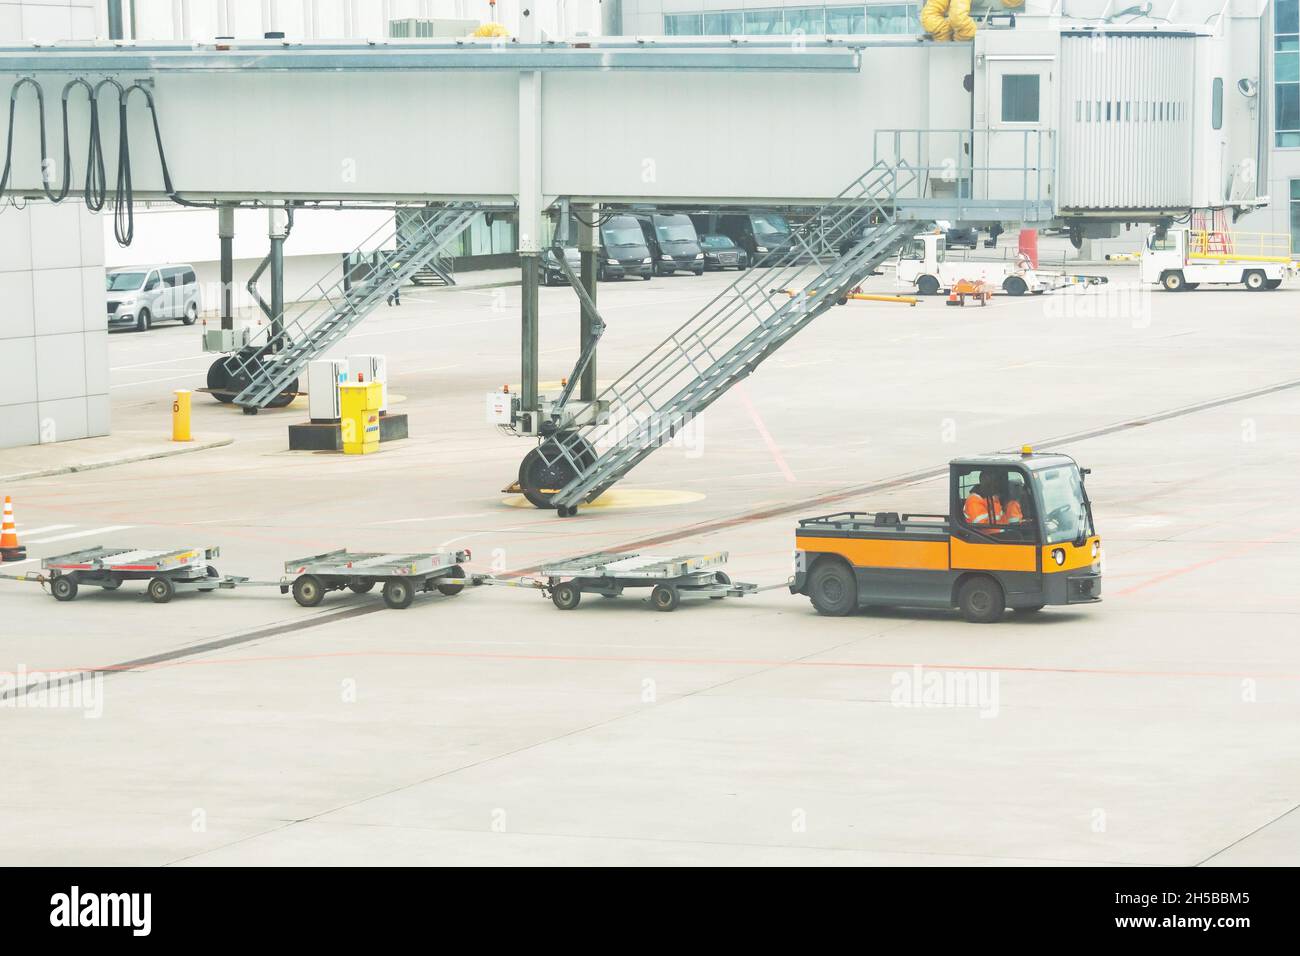 Several empty luggage trolleys are transported to the plane for unloading flight bags, against the background of the boarding bridge gangway of the te Stock Photo